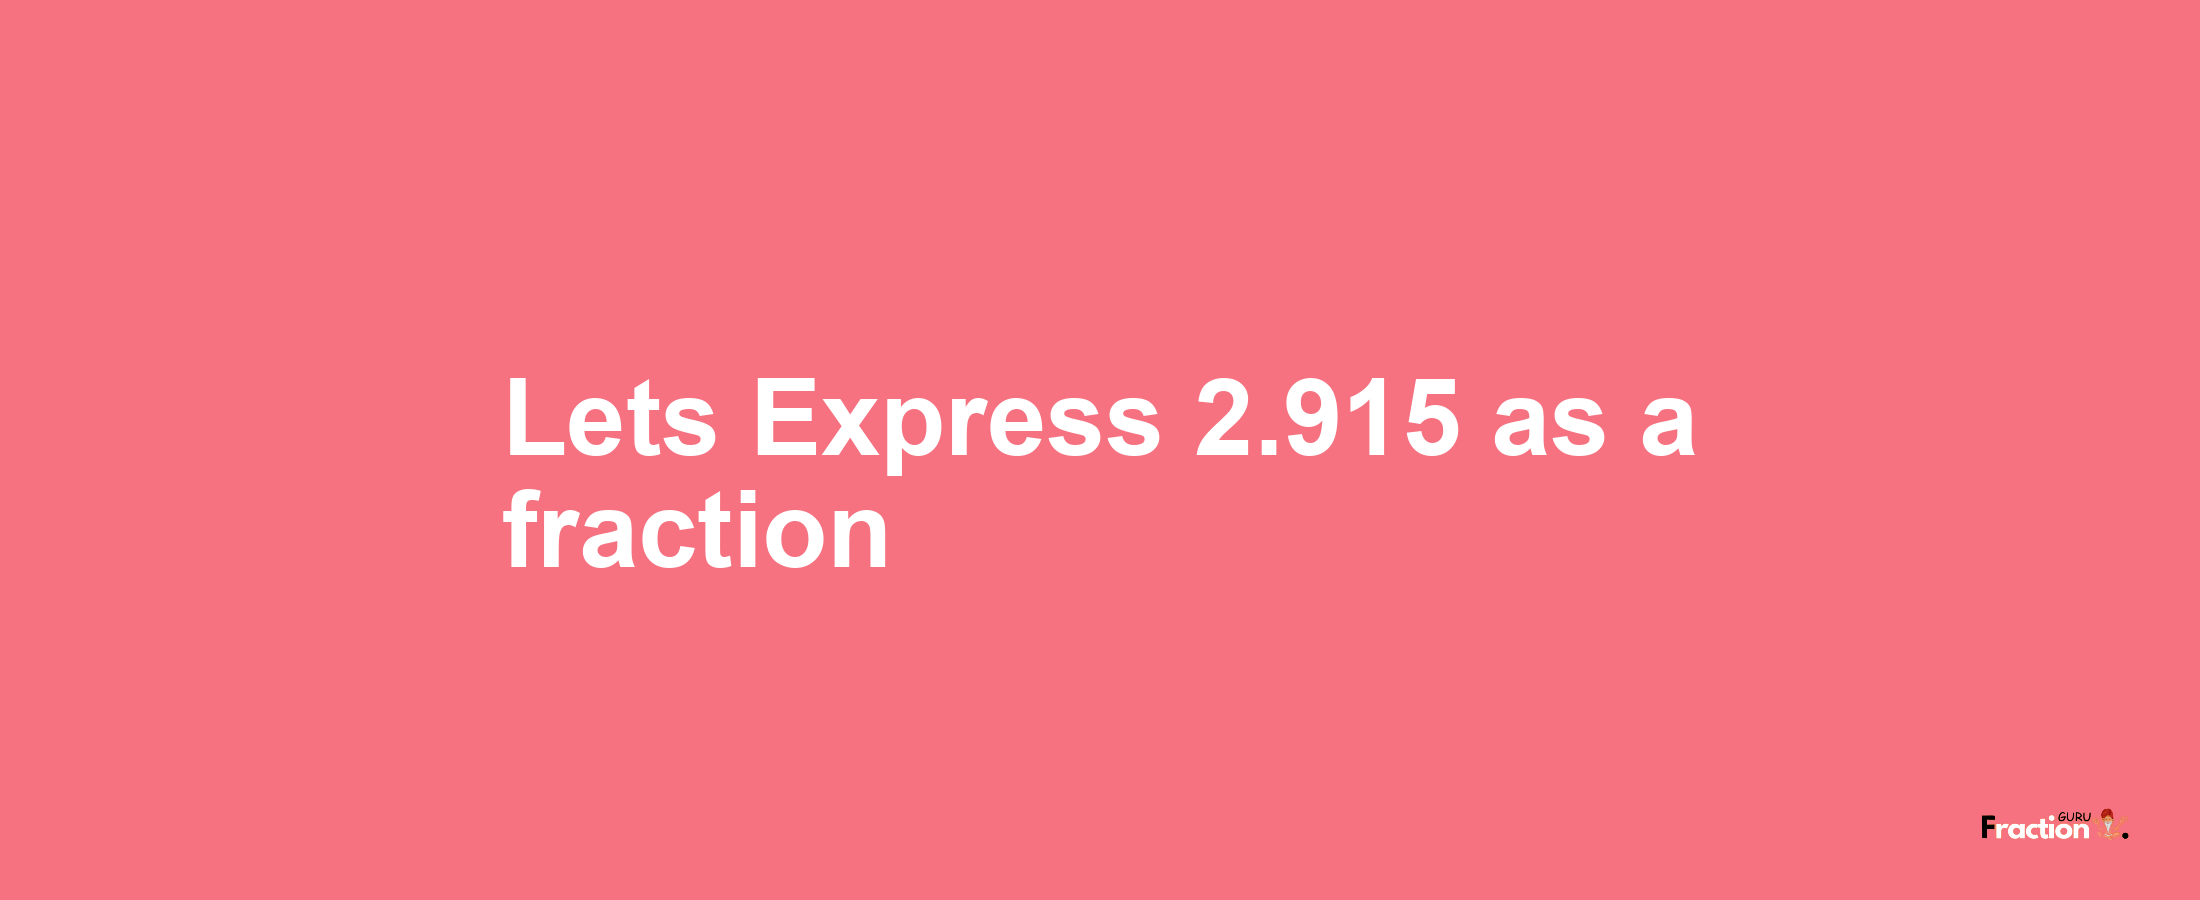 Lets Express 2.915 as afraction